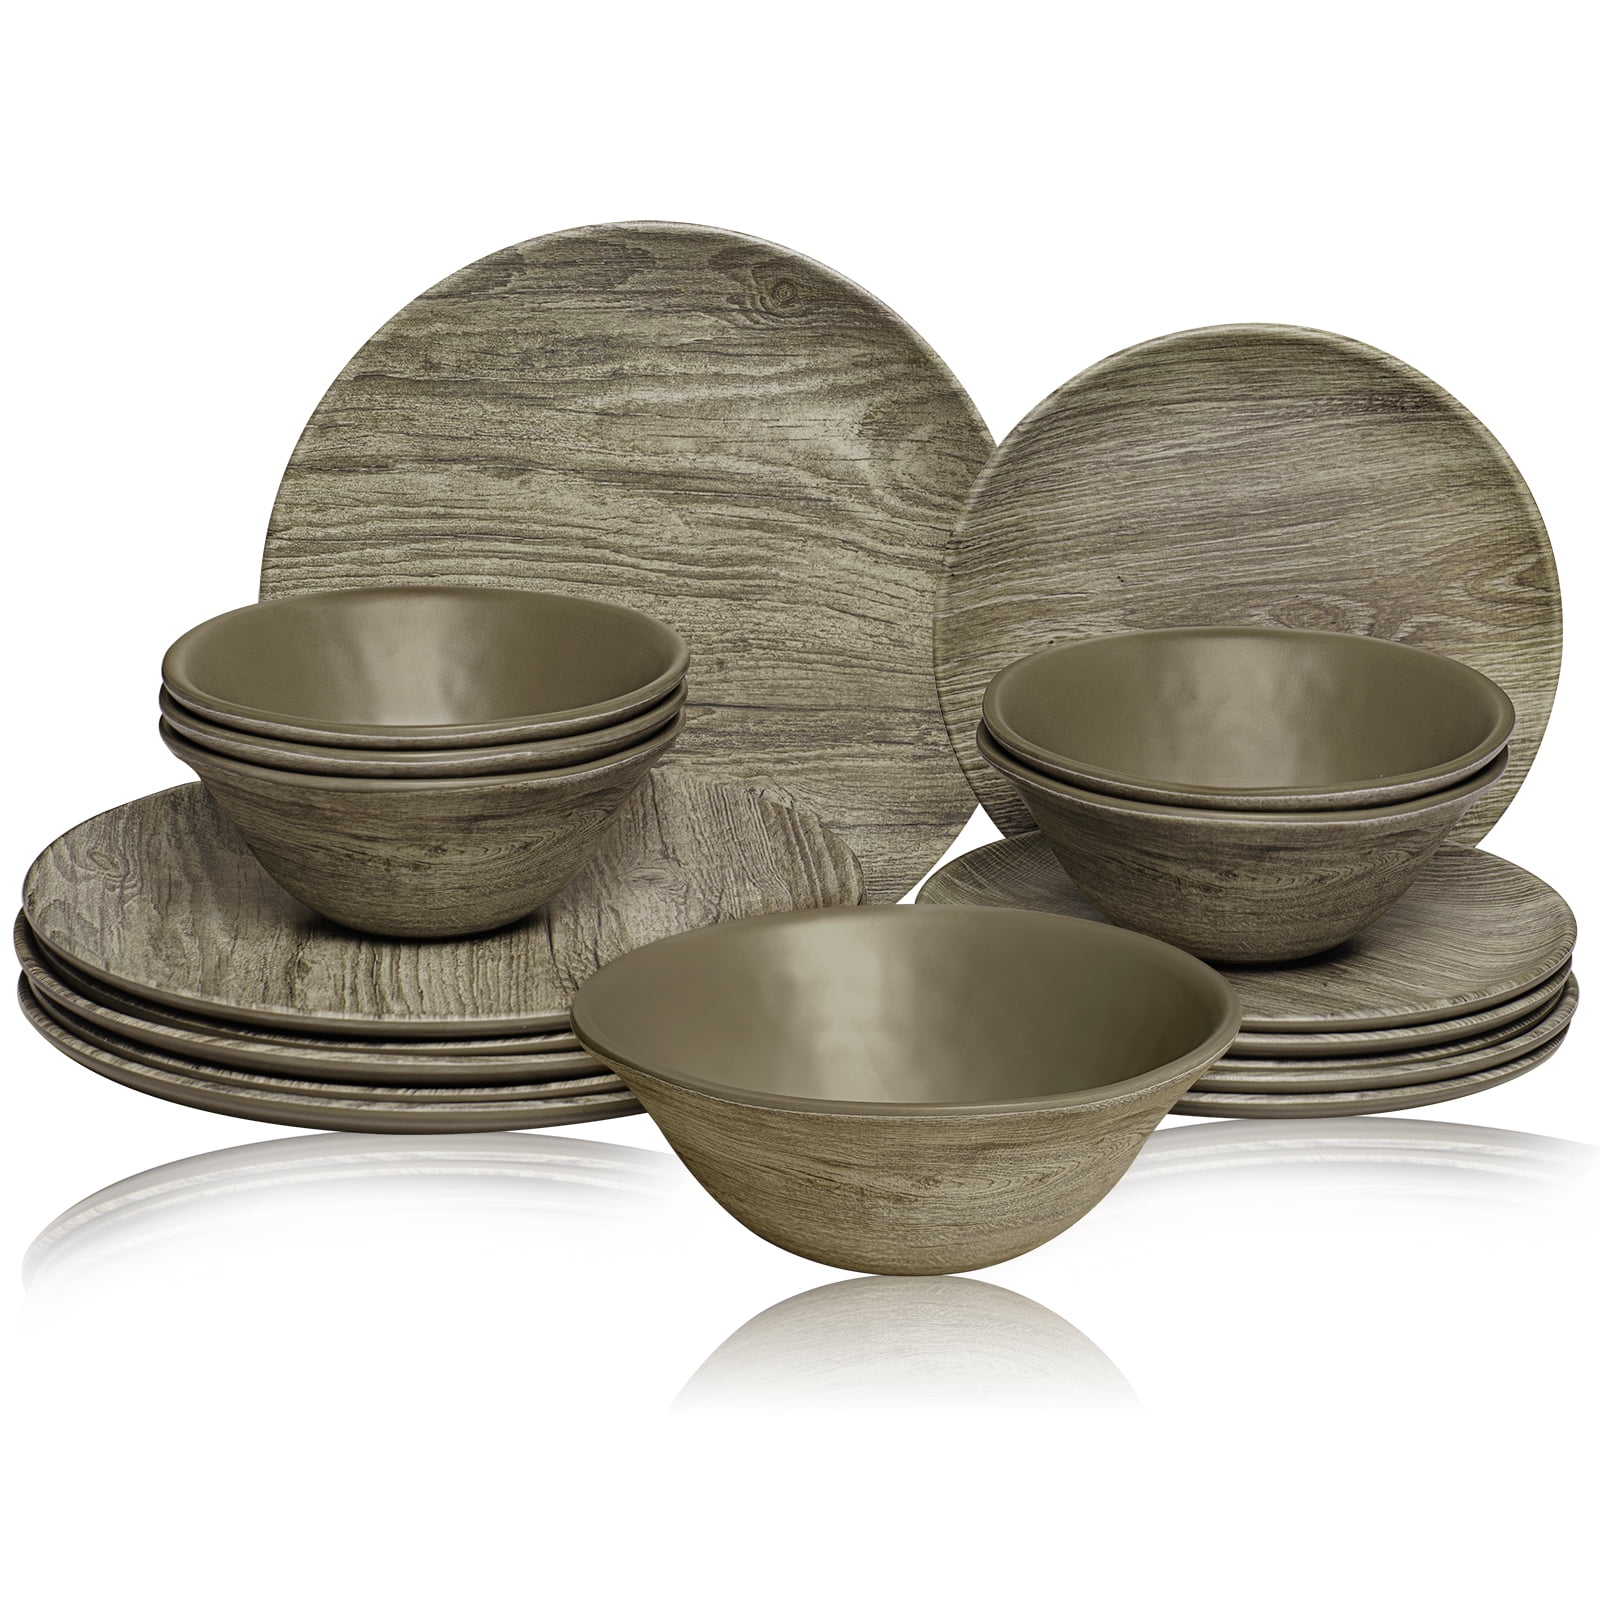 18-Piece Rustic Dishes Set TP Melamine Dinnerware Set Wood Grain Dinner Service for 6 with Bowls and Salad Dinner Plates 